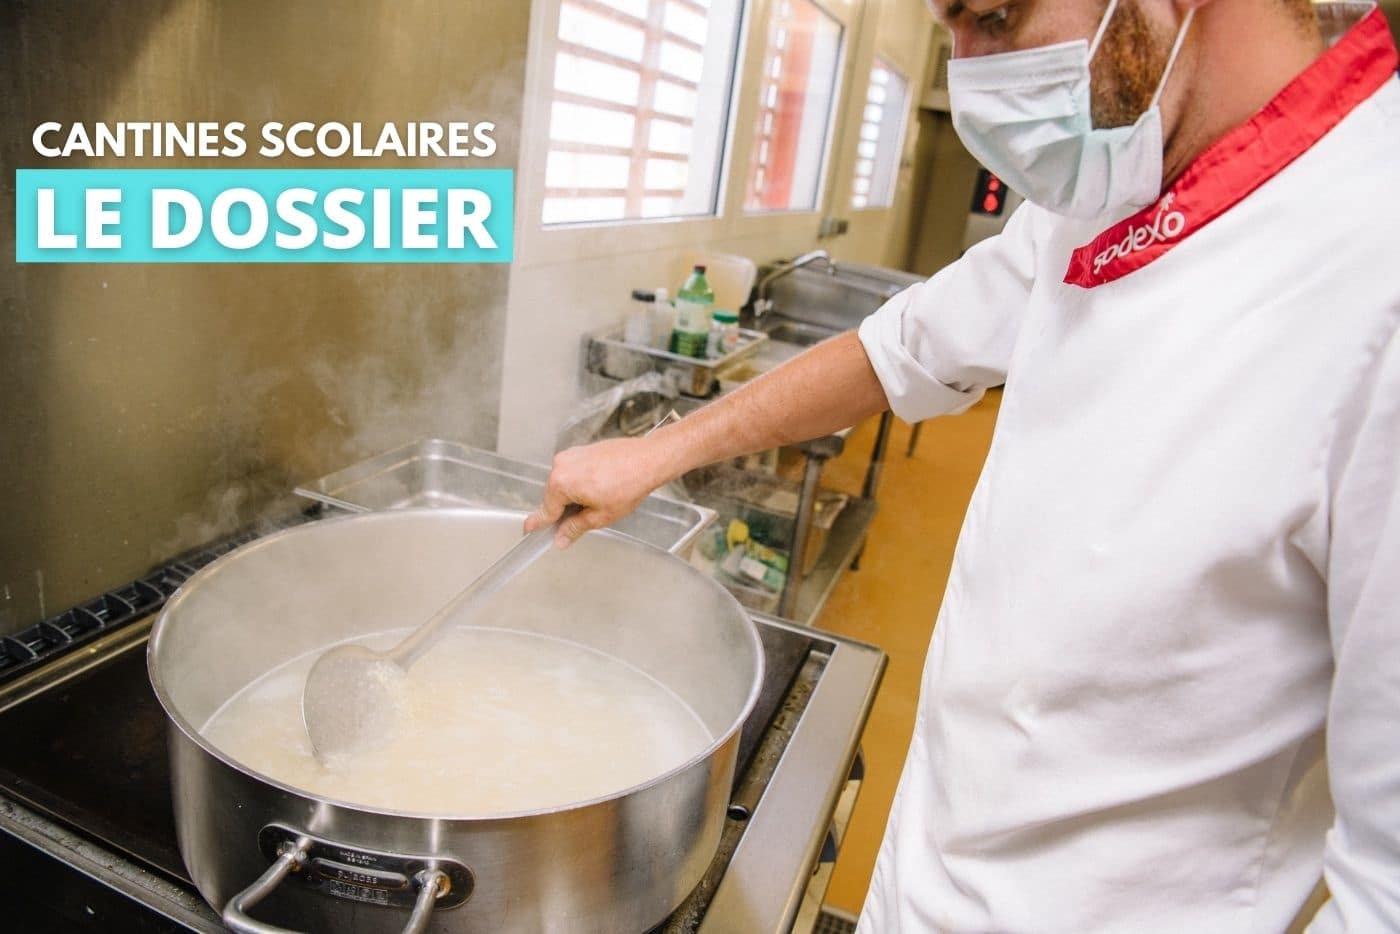 , Cantines marseillaises : Quand Sodexo se met enfin à table, Made in Marseille